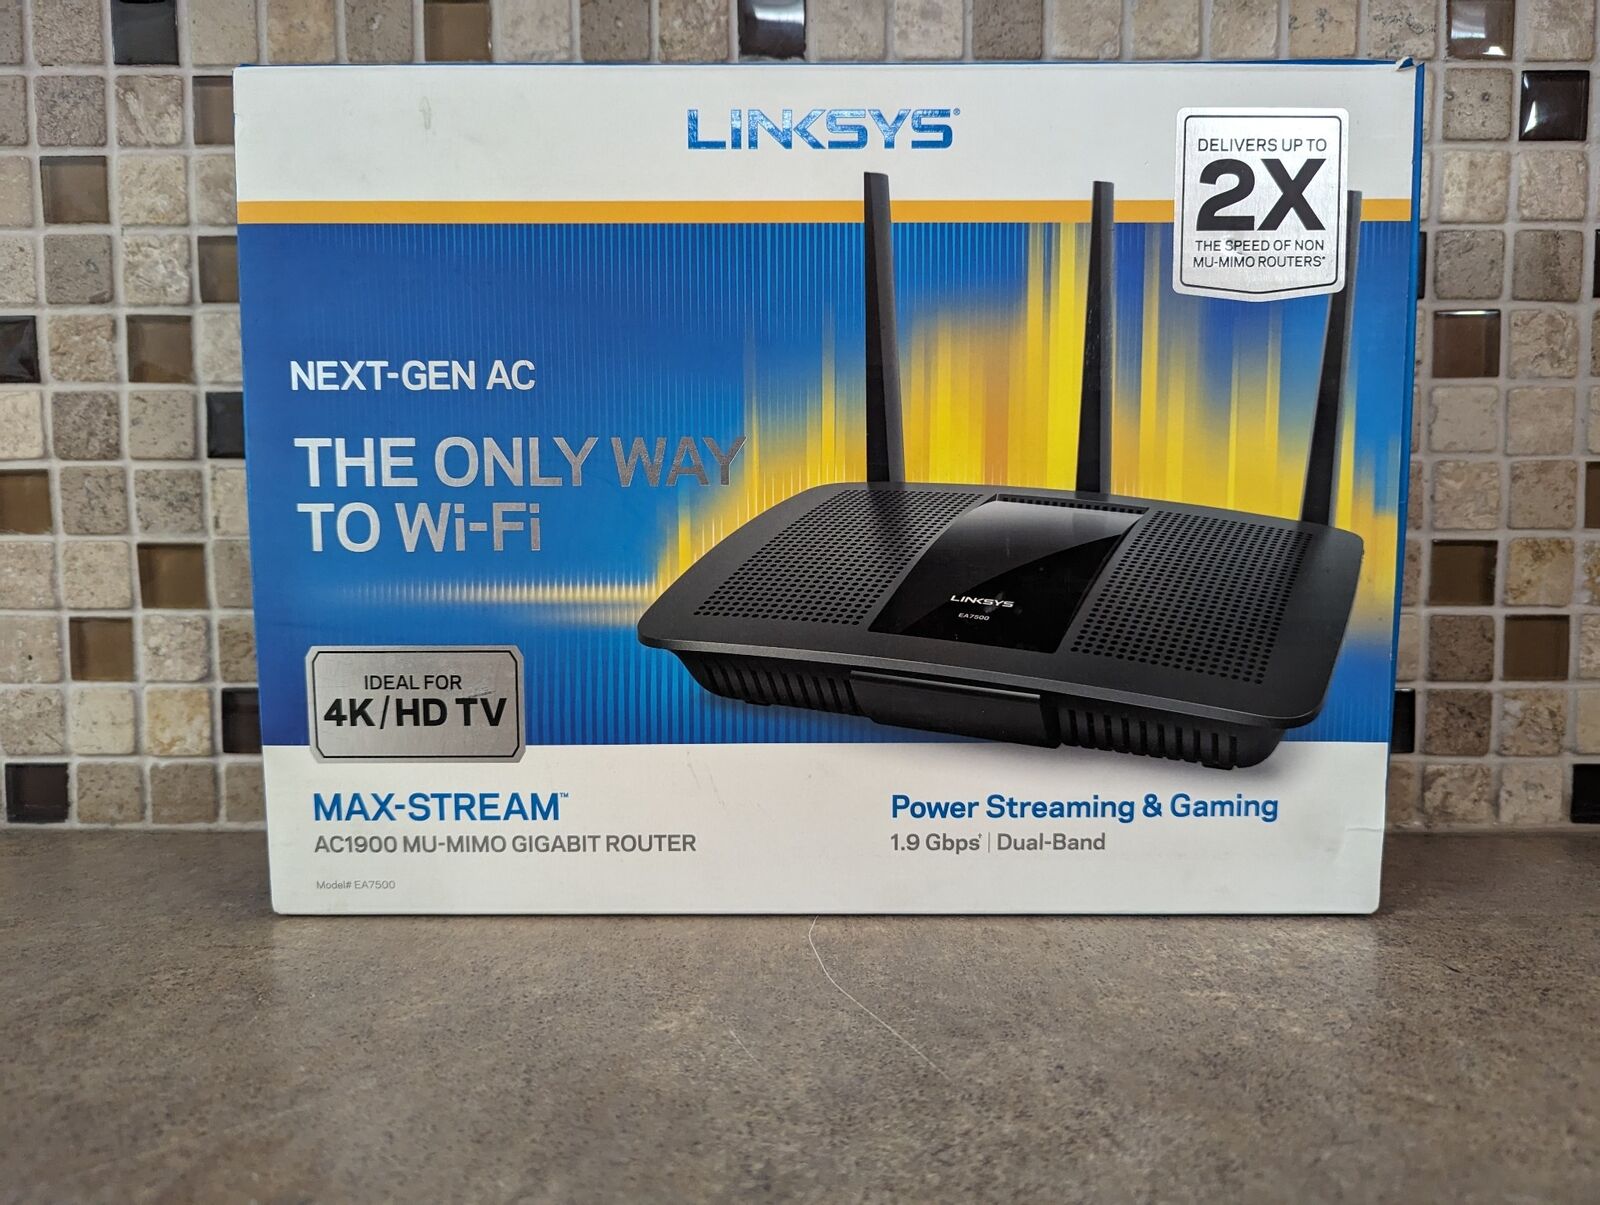 LINKSYS EA7500 WI-FI ROUTER MAX-STREAM AC1900 MU-MIMO GIGABIT 1300 MBPS DR2-7